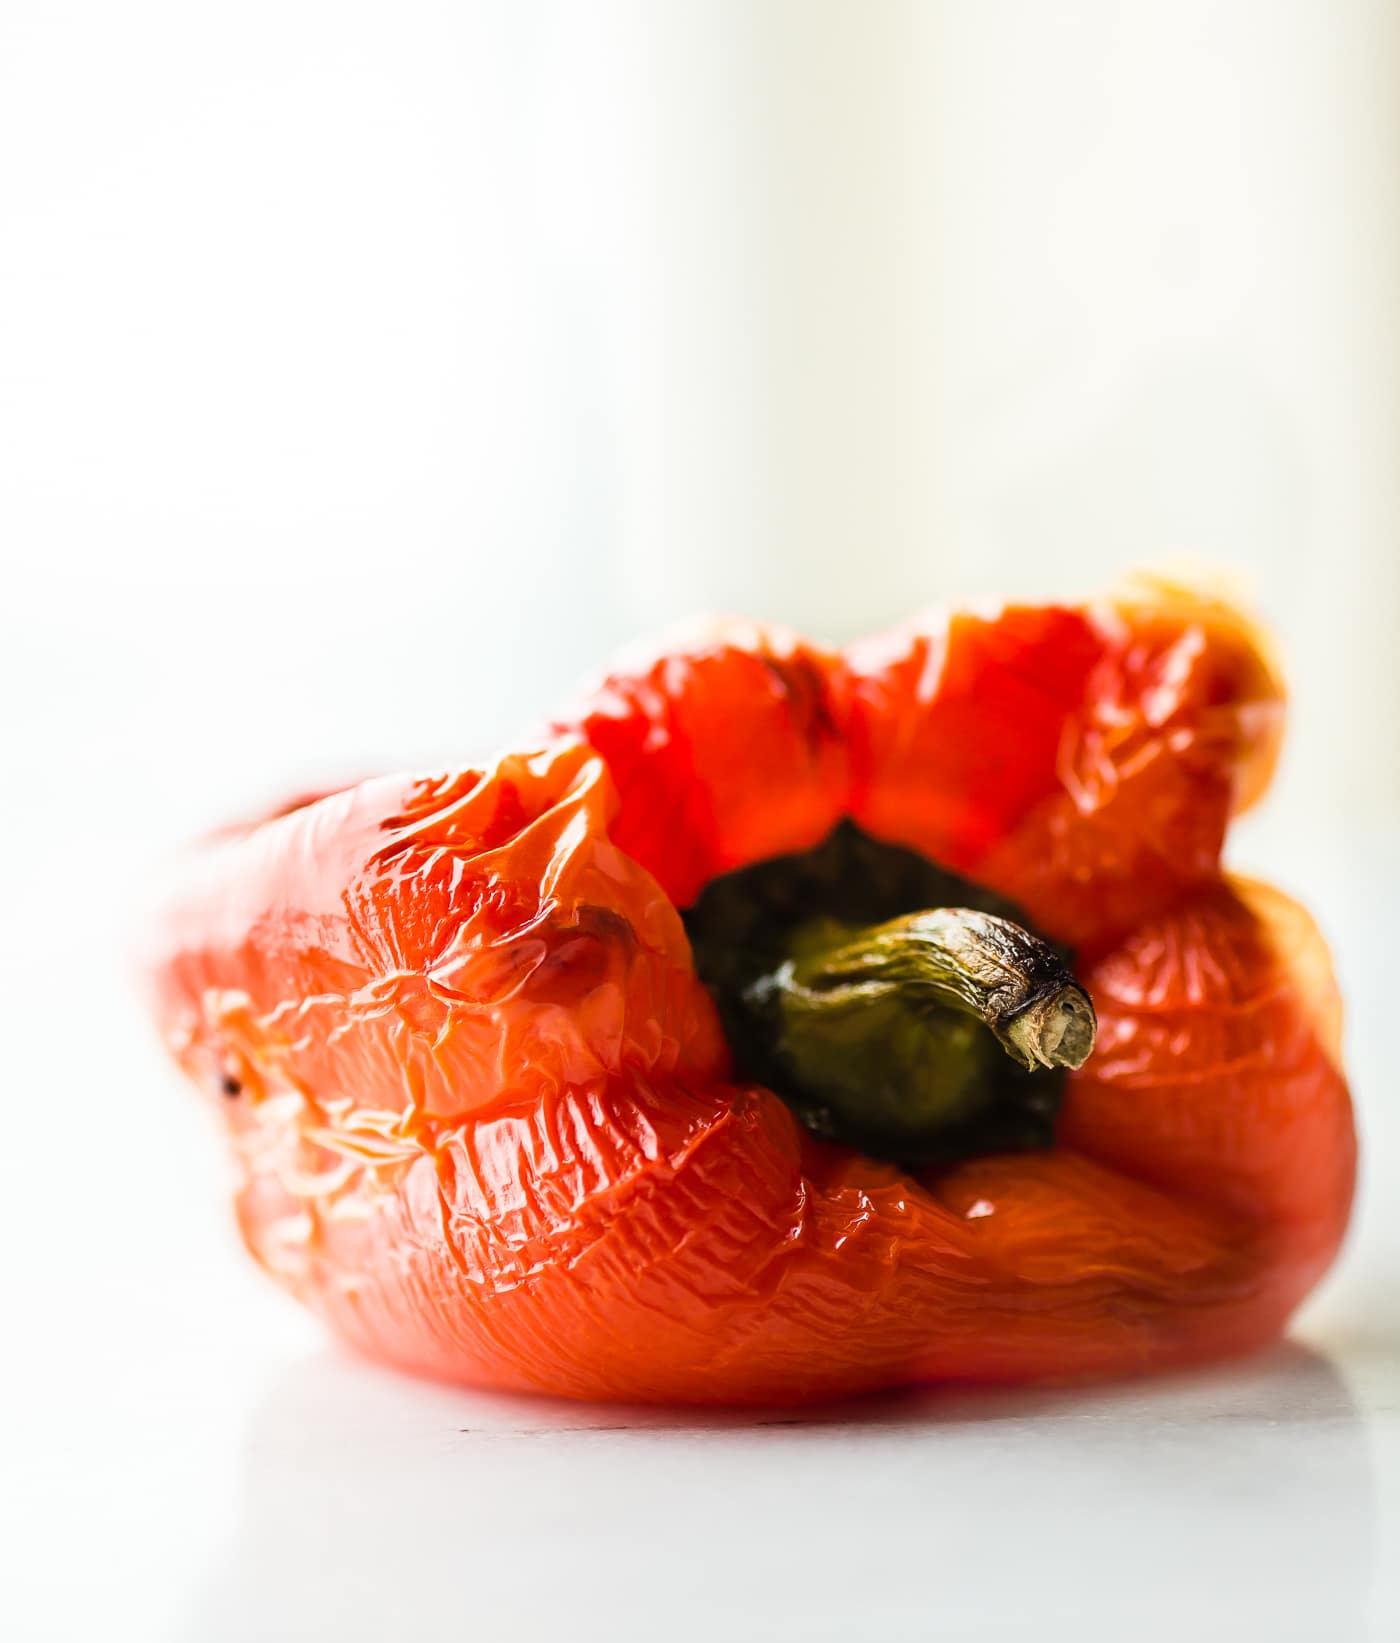 Roasted red pepper.